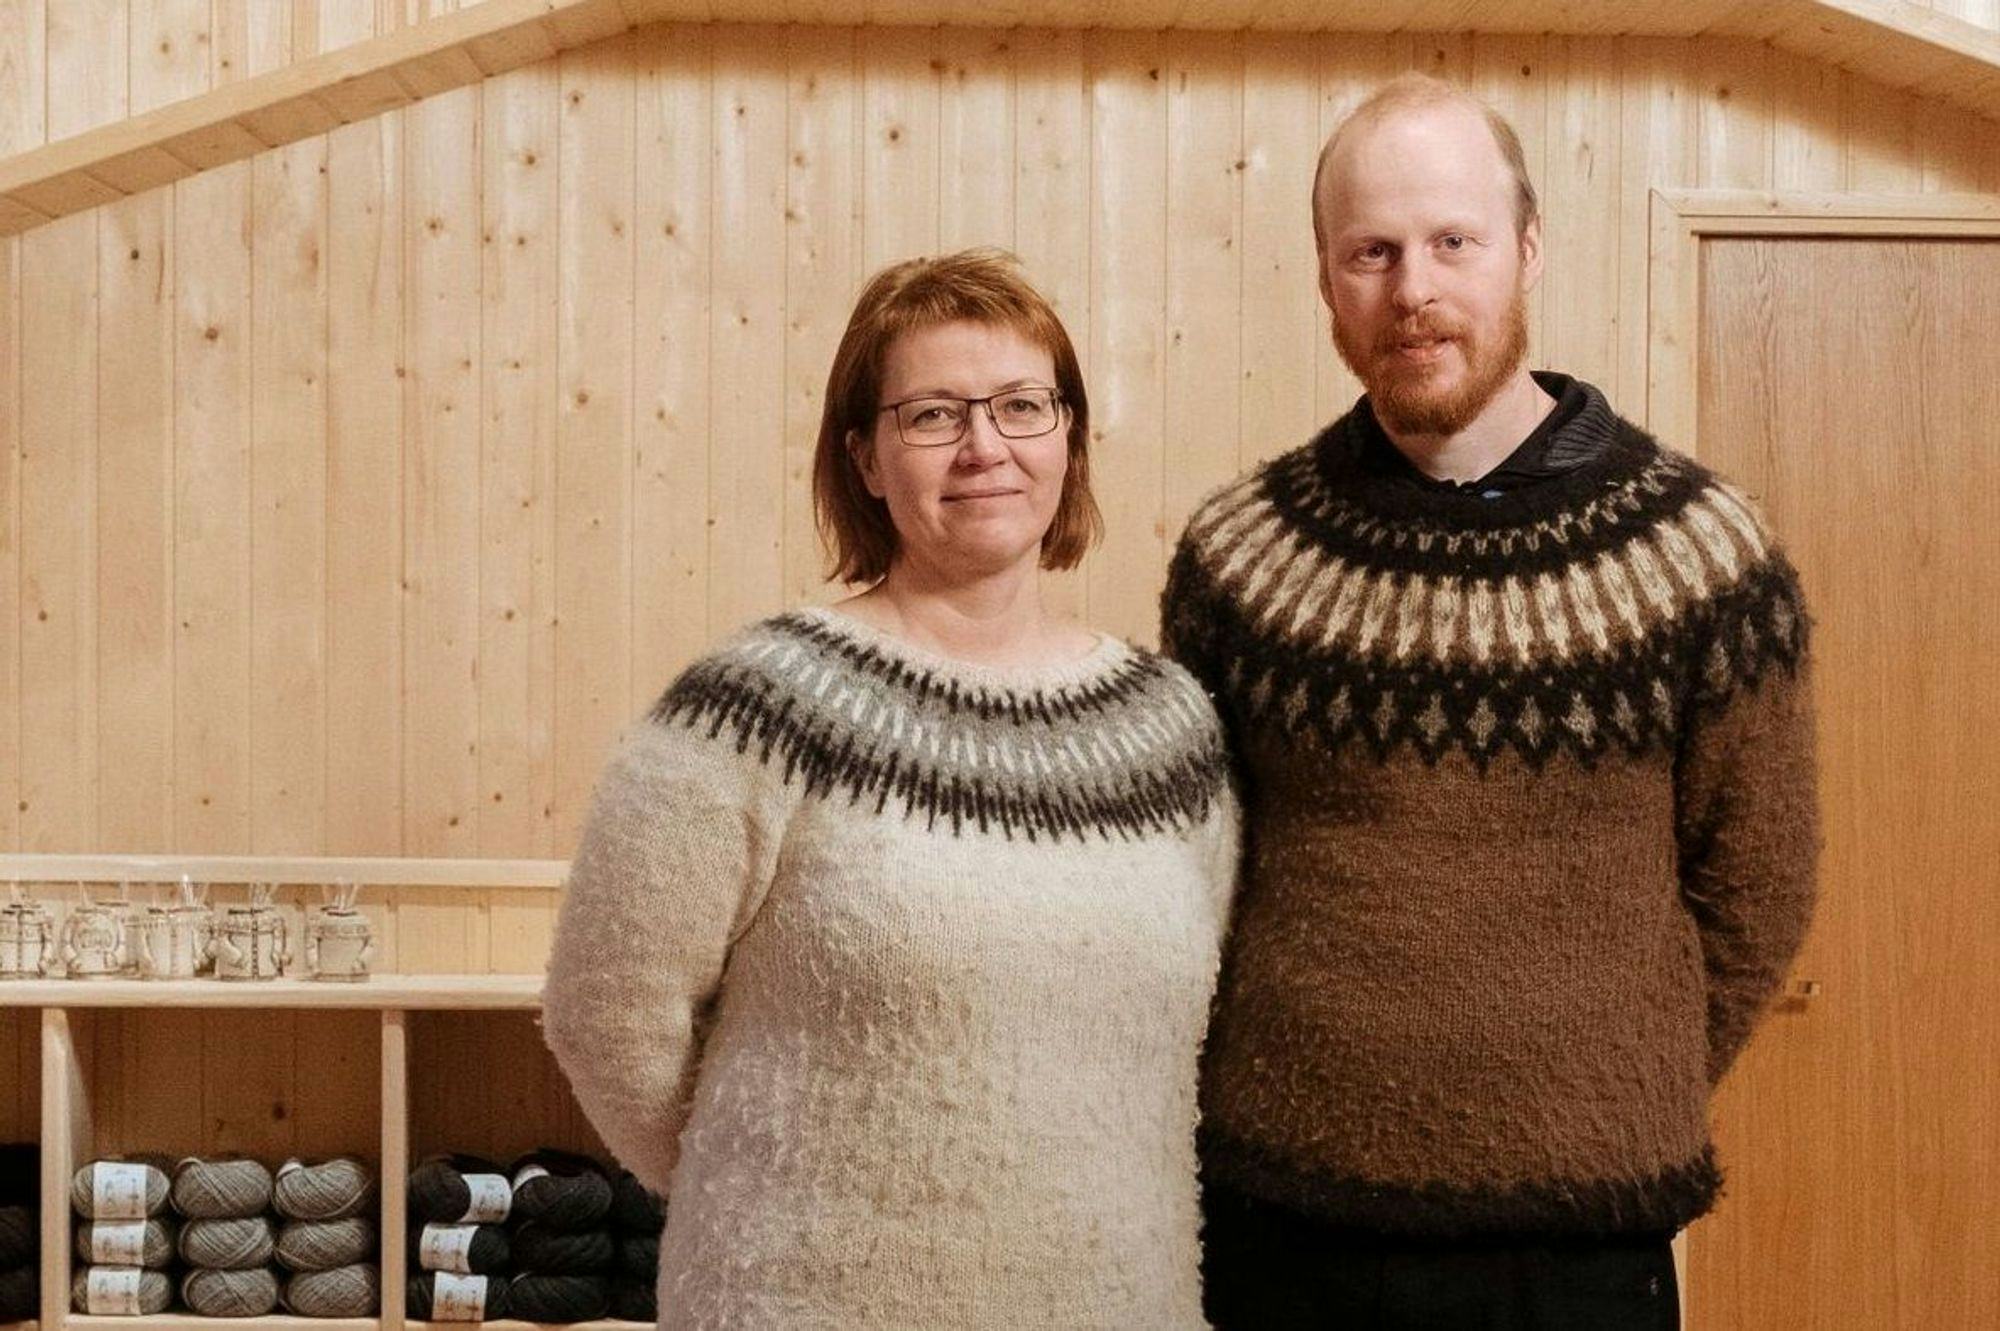 A man and a woman wearing traditional patterned Icelandic sweaters standing in a room with a wooden interior